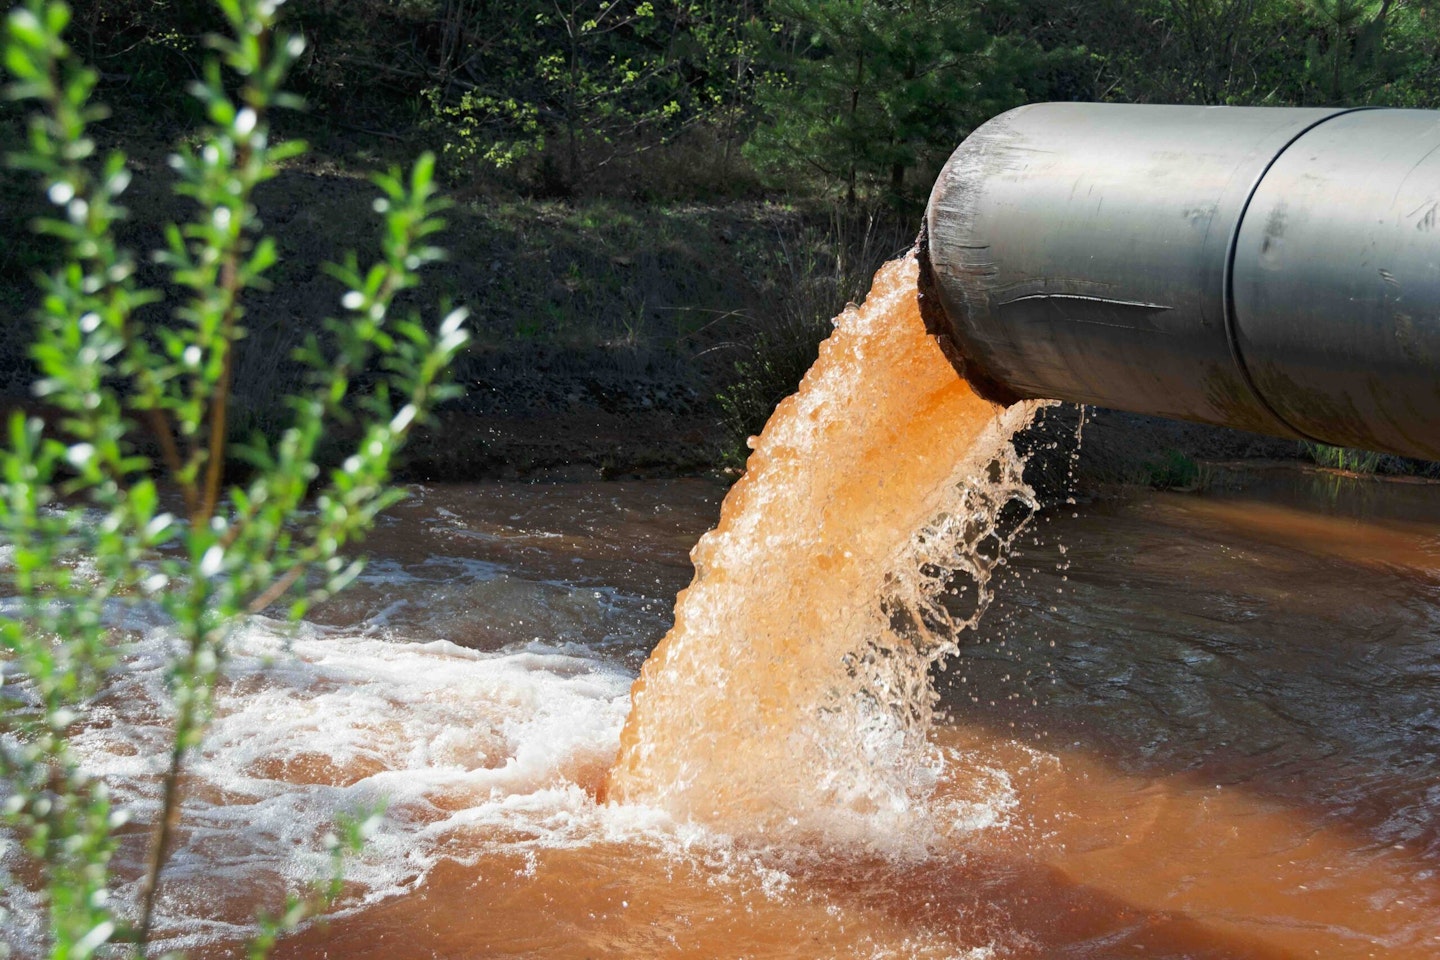 Wastewater output doubled in 12 months. Credit: Shutterstock